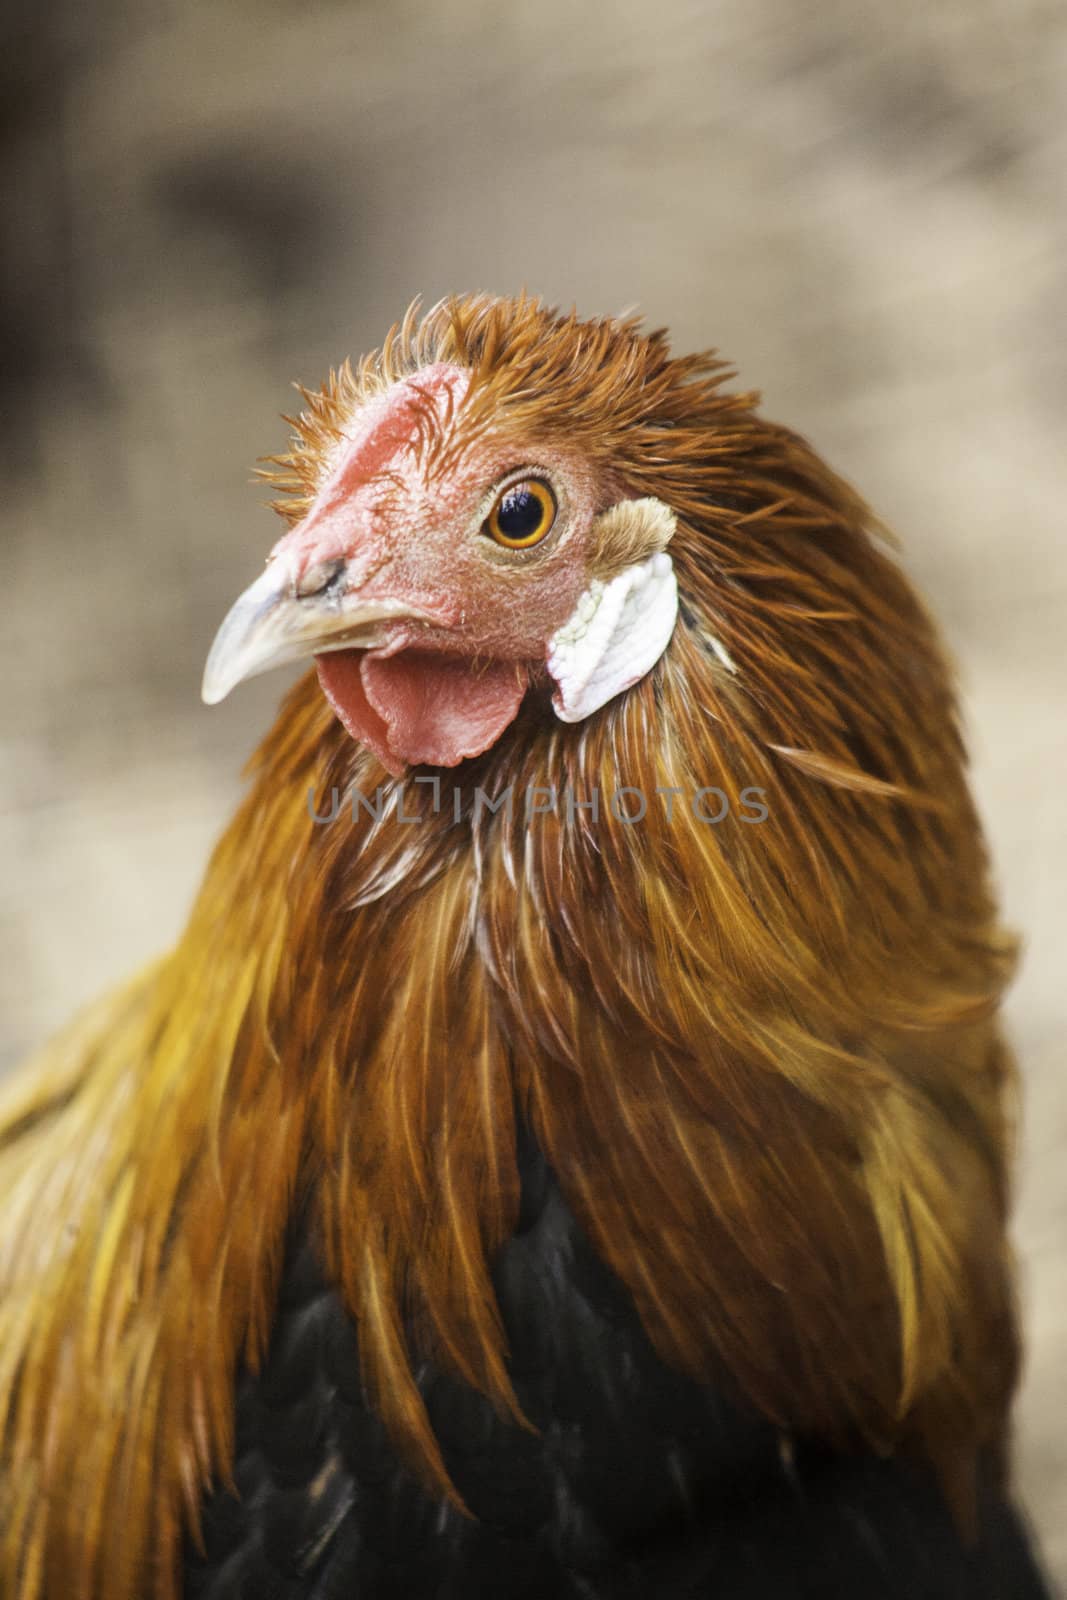 Head portrait of a hen with long silky brown feathers and an alert expression